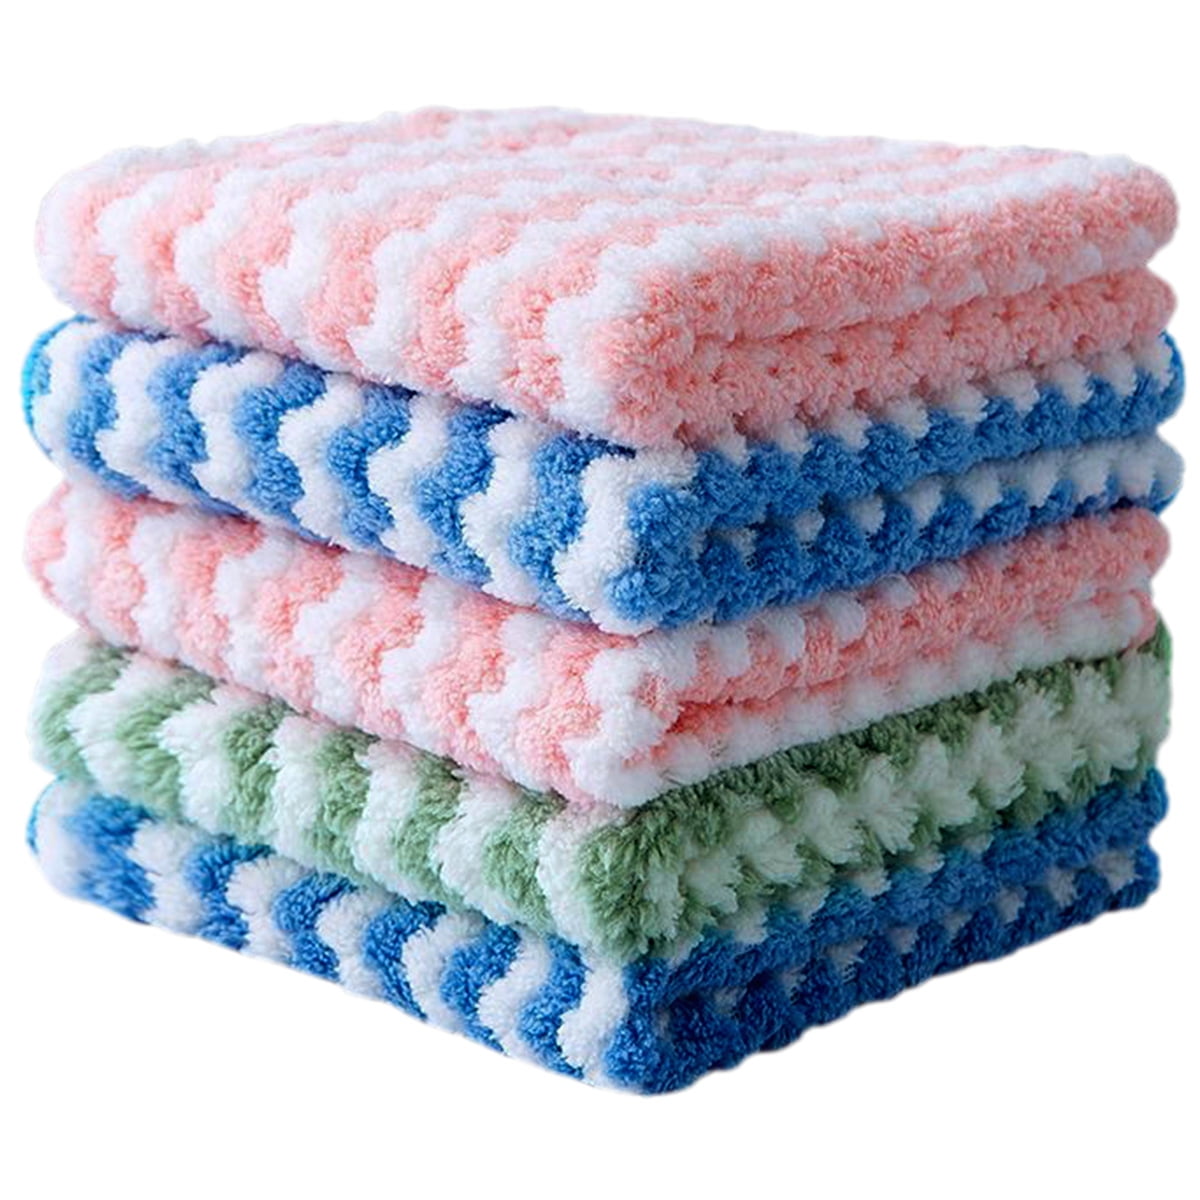 Glynniss Dishcloths Kitchen Highly Absorbent Dish Rags 100% Cotton Dish  Cloths for Washing Dishes, Cleaning (11 x 11 Inches, 12 pcs, White)